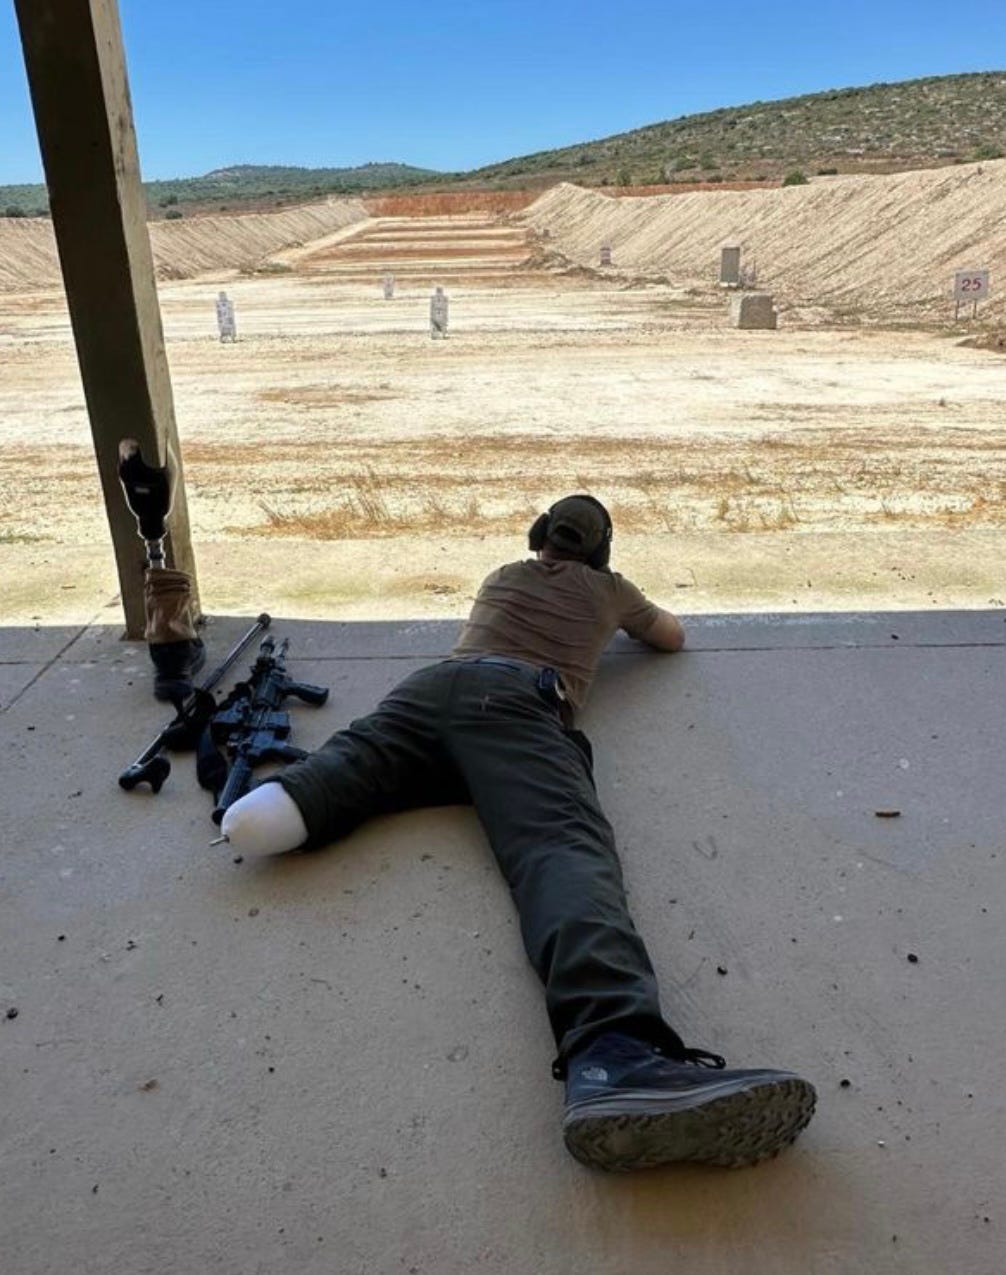 Yoav lies on his stomach with gun aimed into the desert. he is wearing an army uniform. his left leg is amputated below his knee.